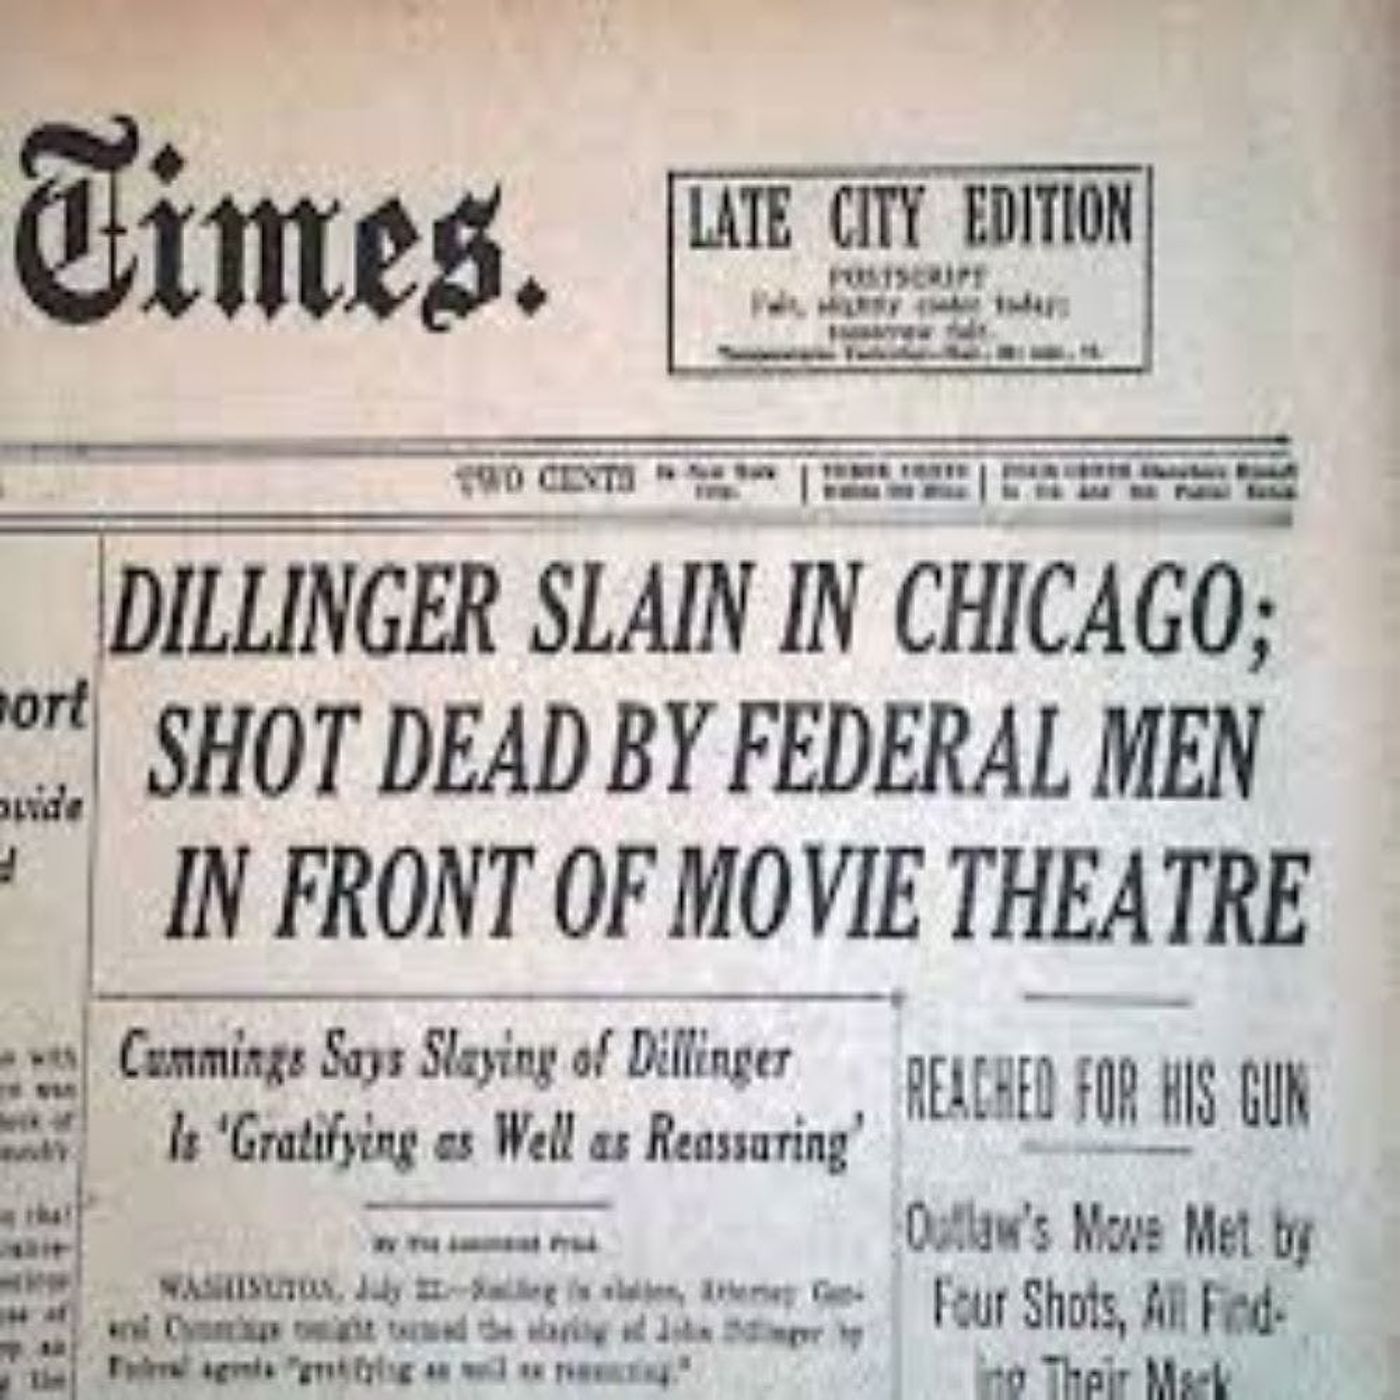 Part 1 of 3 - The Death of John Dillinger